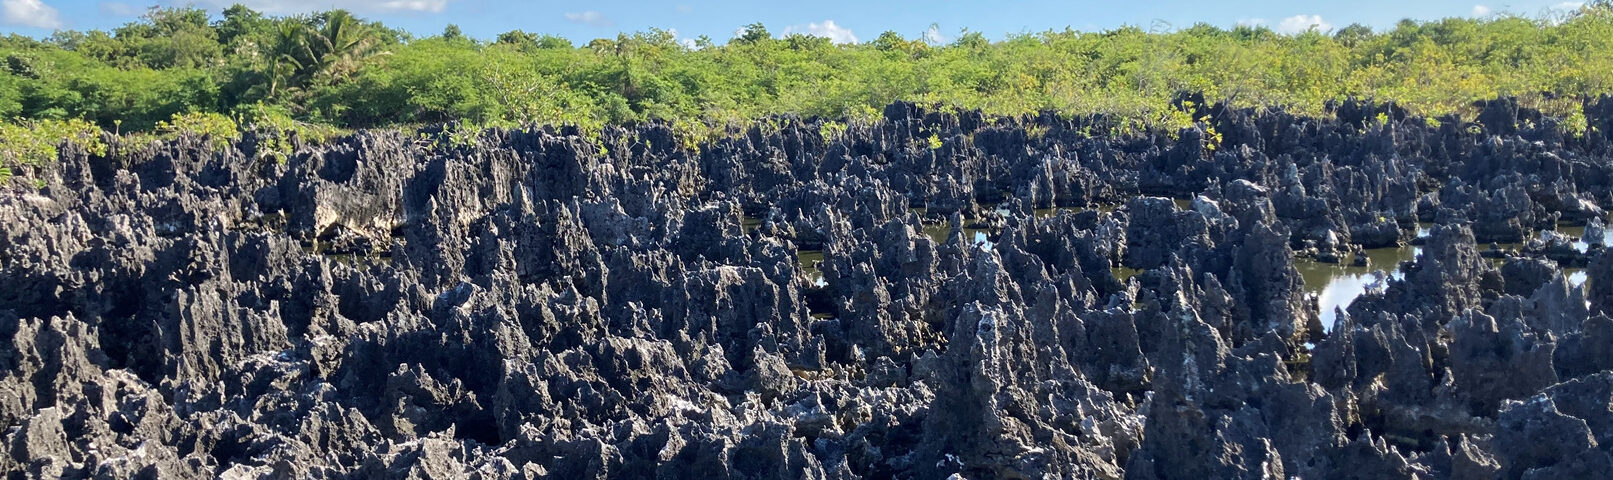 Black Limestone Formations in Hell on Grand Cayman Island